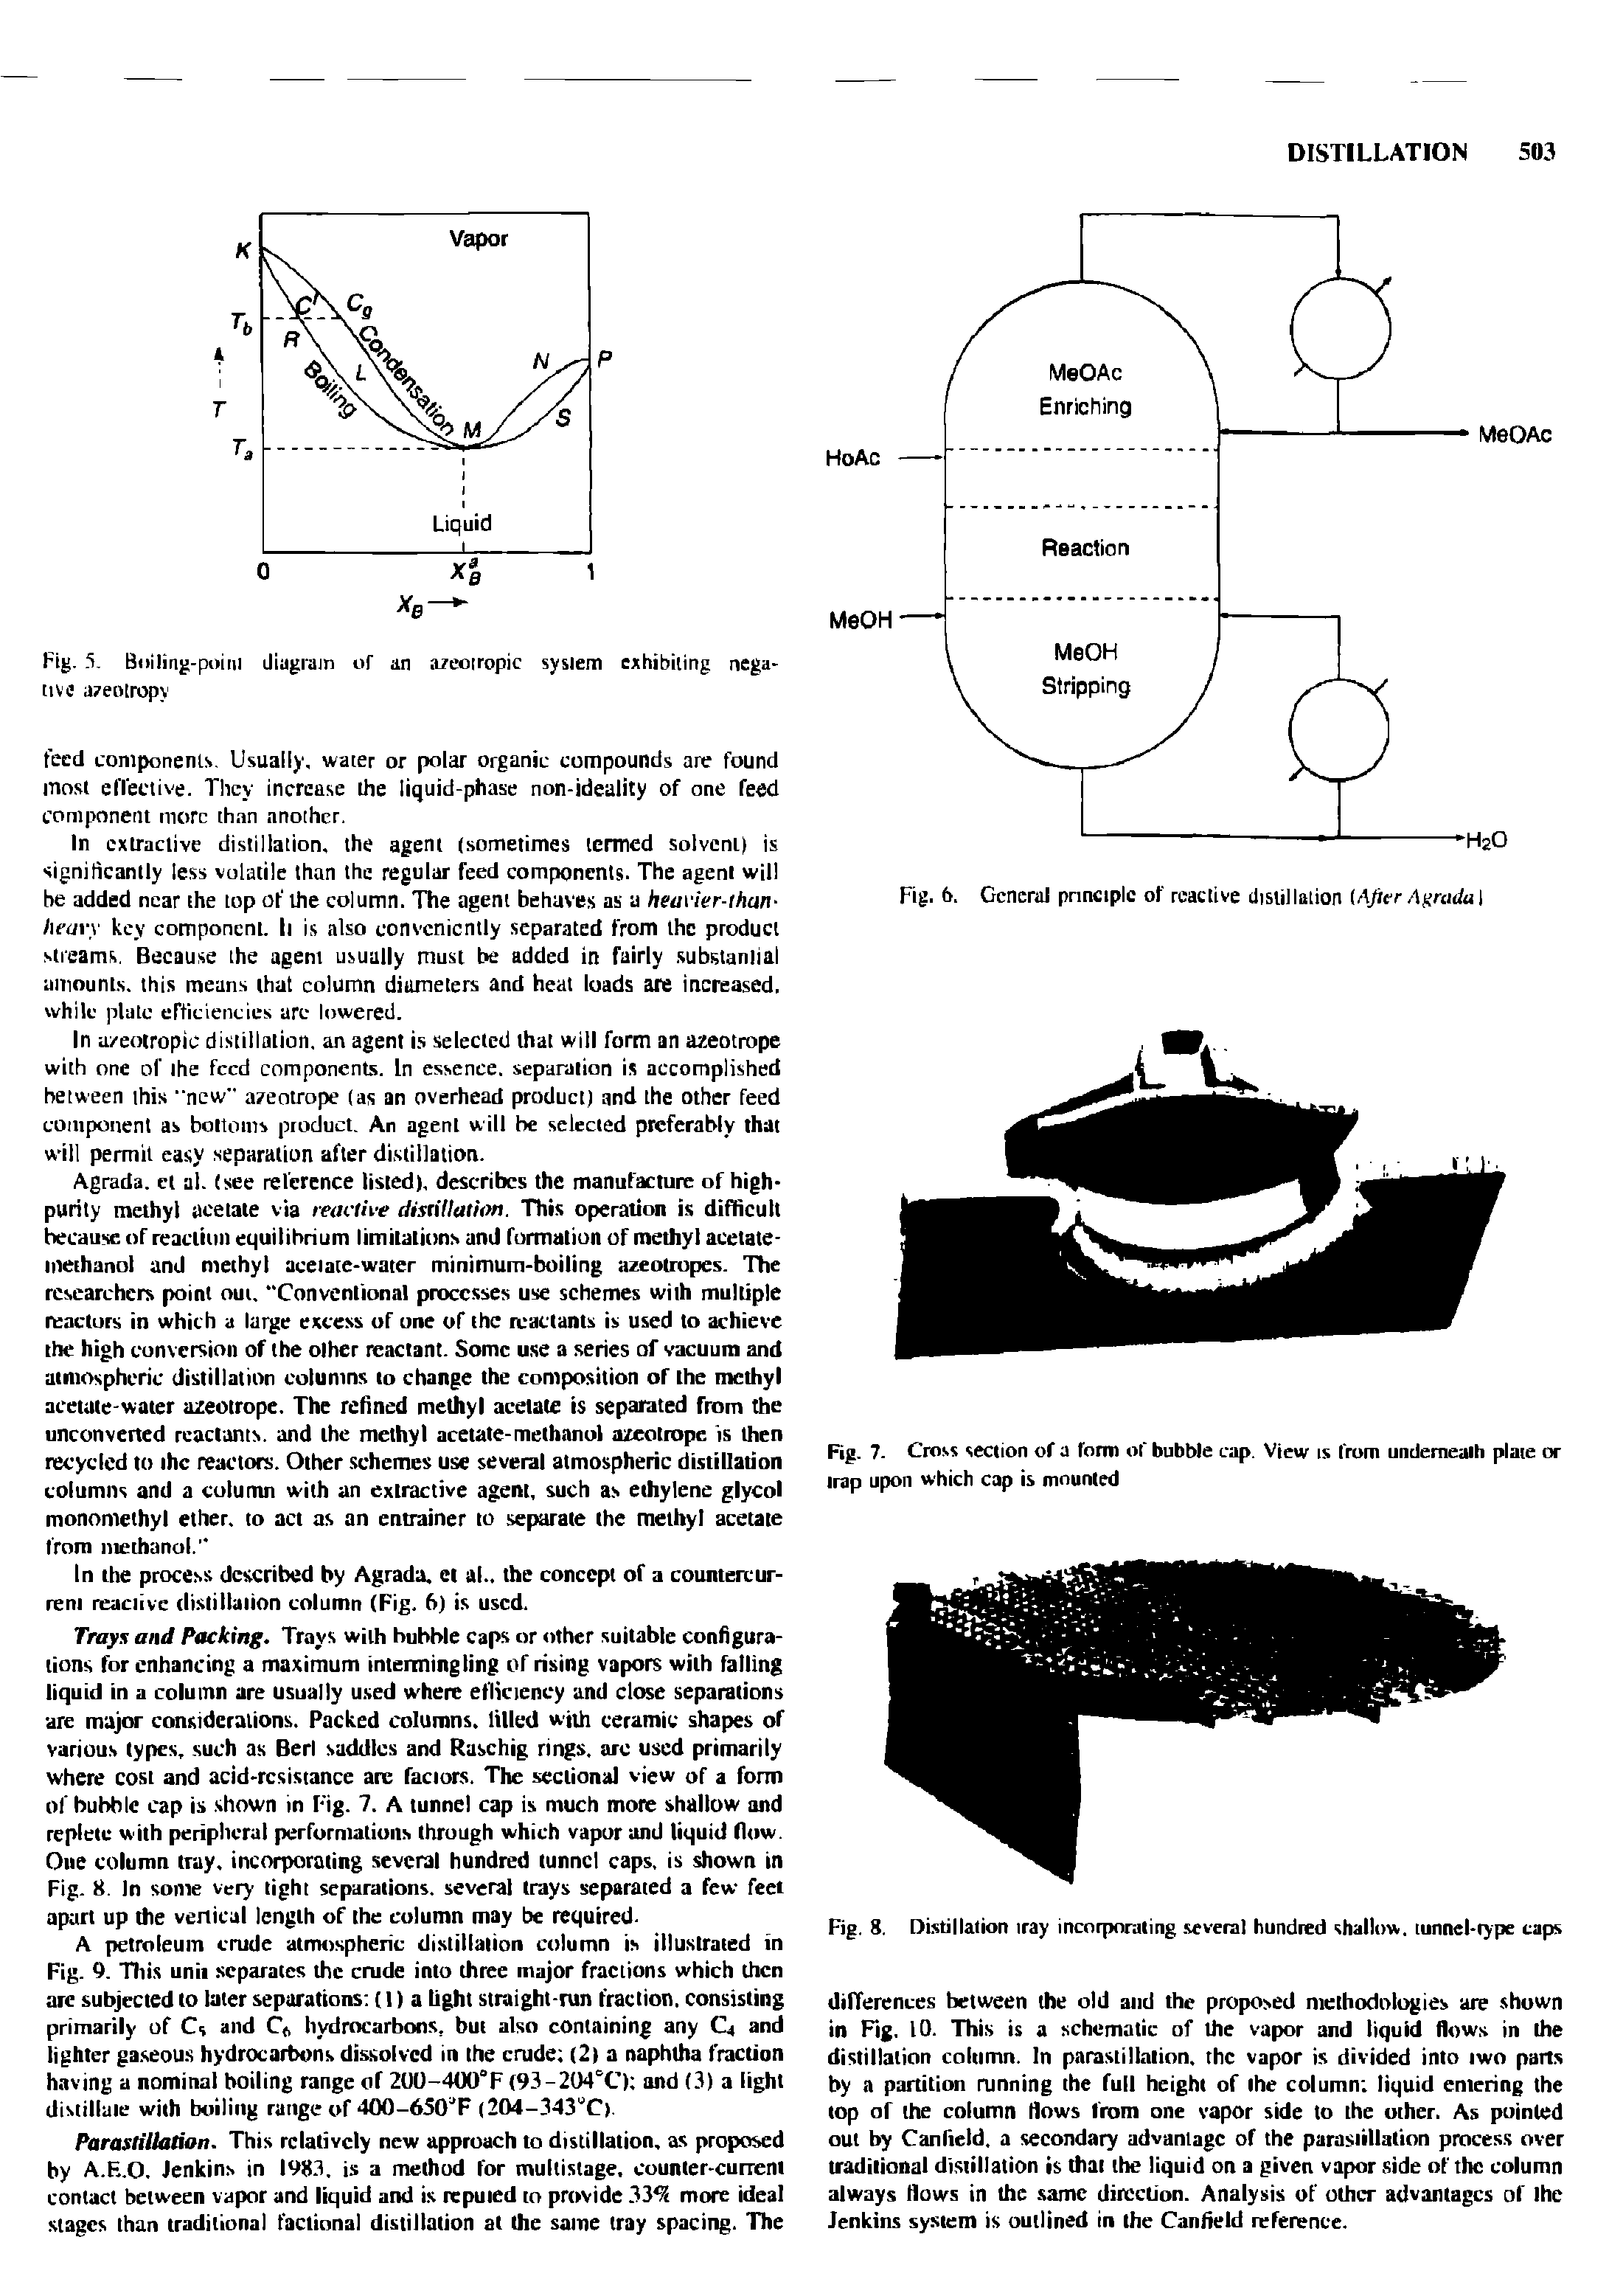 Fig. 5. Boiling-point diagram of an azeotropic system exhibiting negative azeotropy...